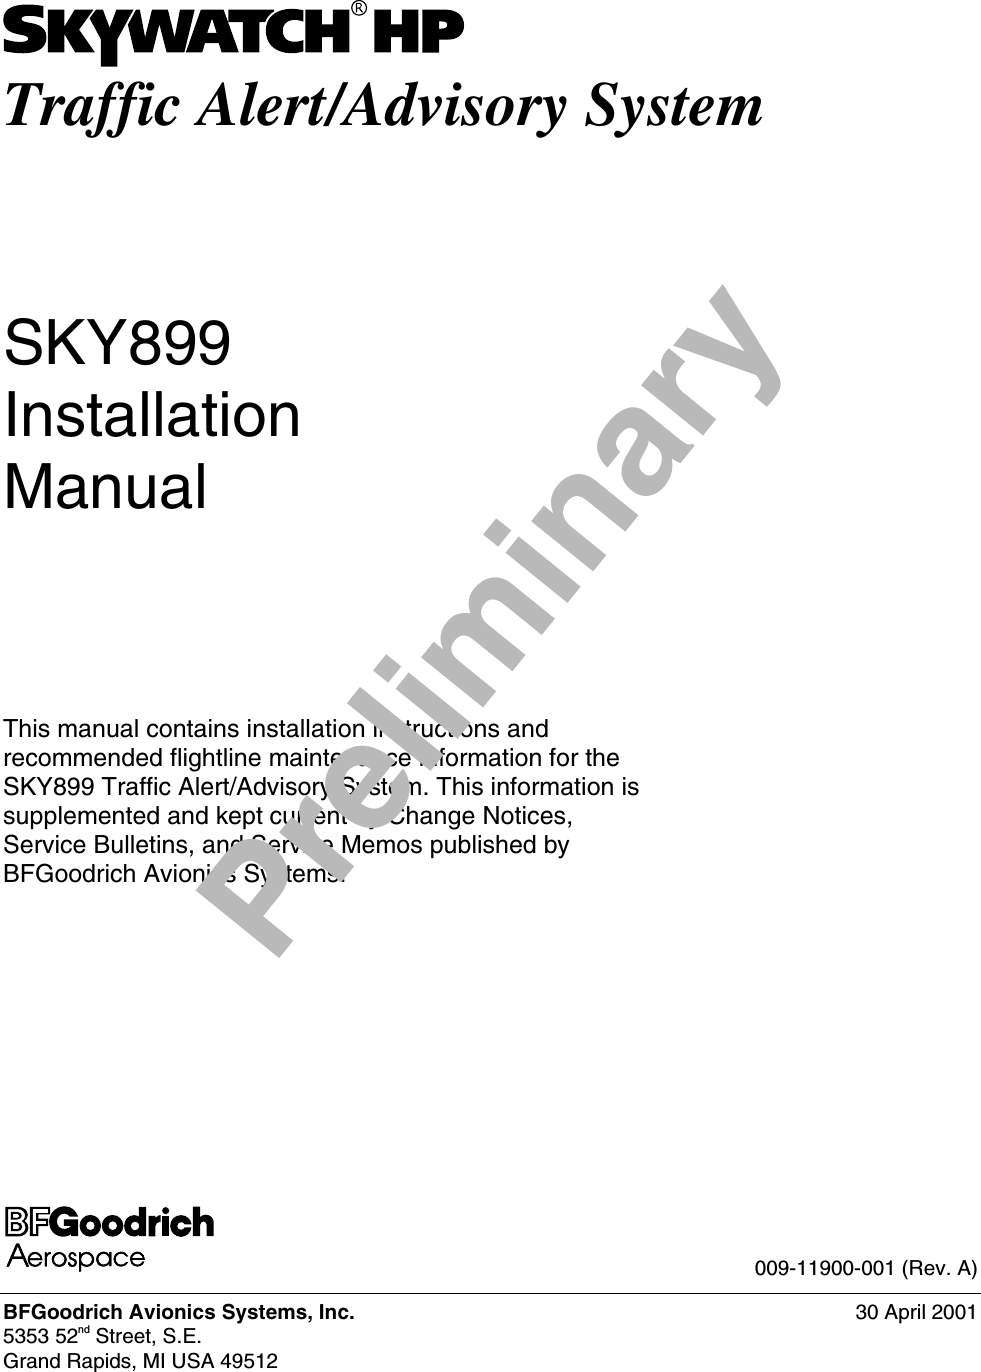 Traffic Alert/Advisory SystemSKY899InstallationManualThis manual contains installation instructions andrecommended flightline maintenance information for theSKY899 Traffic Alert/Advisory System. This information issupplemented and kept current by Change Notices,Service Bulletins, and Service Memos published byBFGoodrich Avionics Systems.009-11900-001 (Rev. A)BFGoodrich Avionics Systems, Inc. 30 April 20015353 52nd Street, S.E.Grand Rapids, MI USA 49512Preliminary